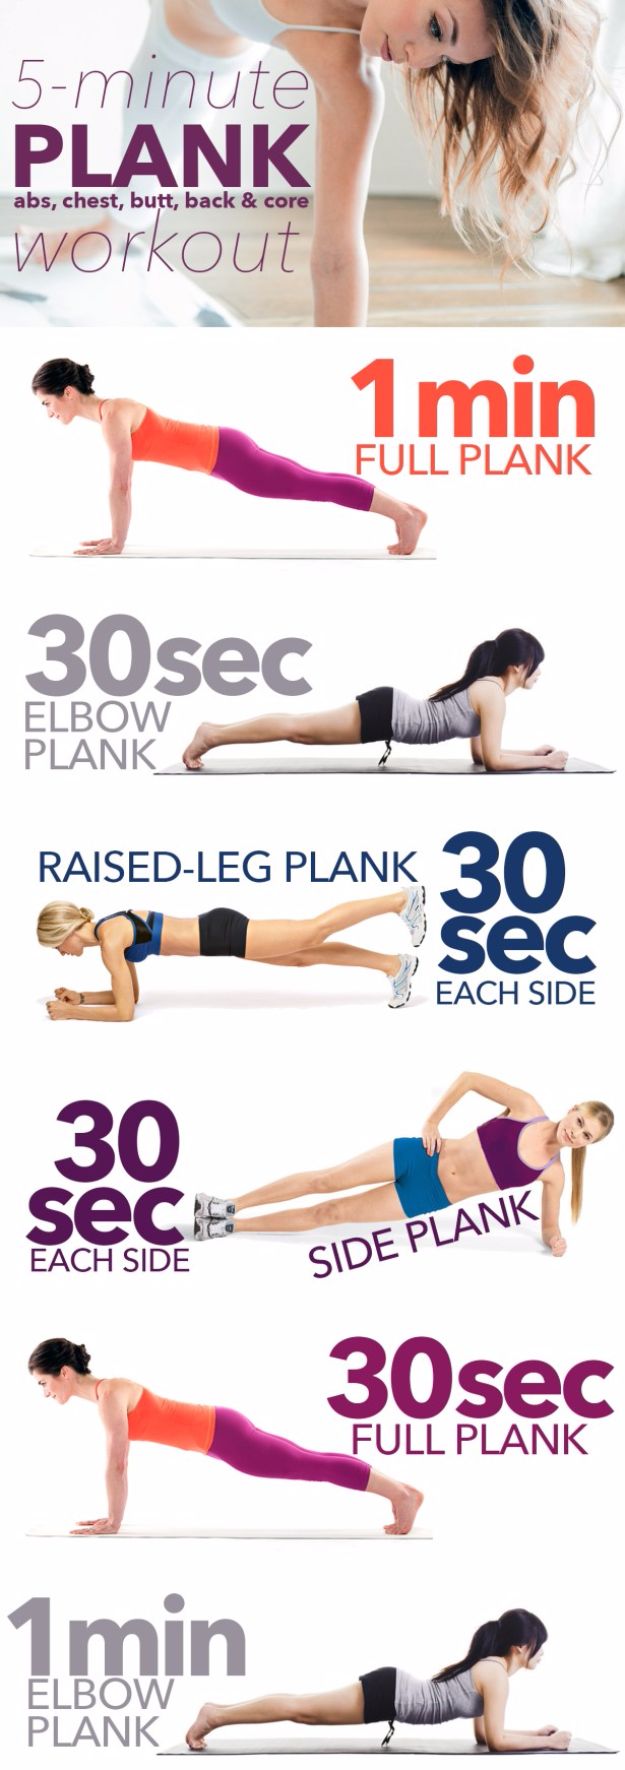 Best Exercises for 2018 - 5-minute “Almost-No-Work” Plank Workout - Easy At Home Exercises - Quick Exercise Tutorials to Try at Lunch Break - Ways To Get In Shape - Butt, Abs, Arms, Legs, Thighs, Tummy 